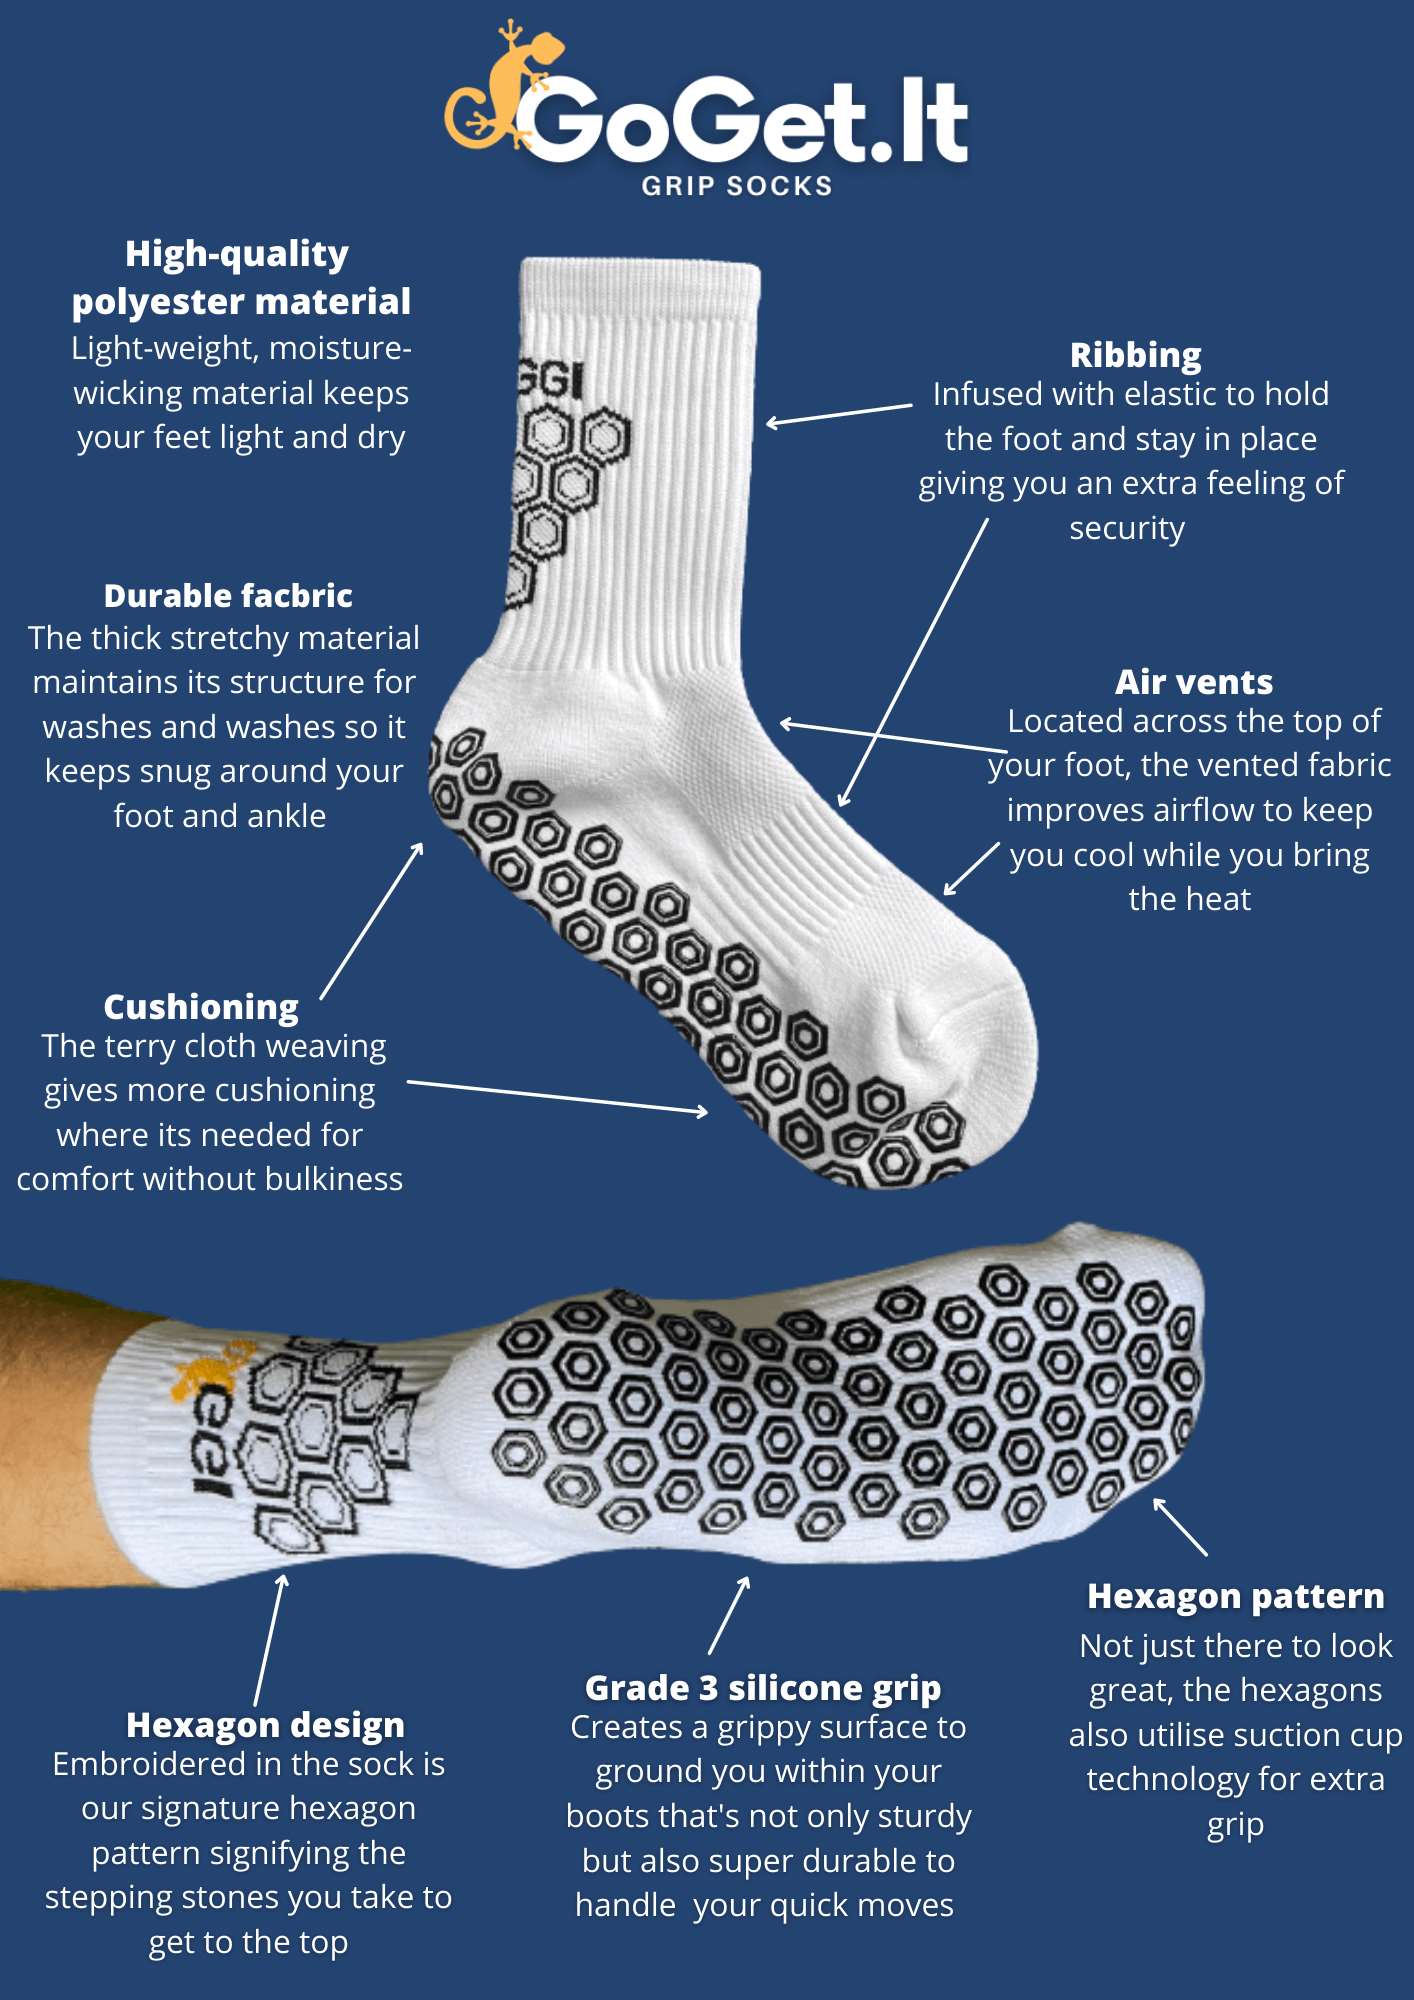 What are modal socks and what are their benefits?